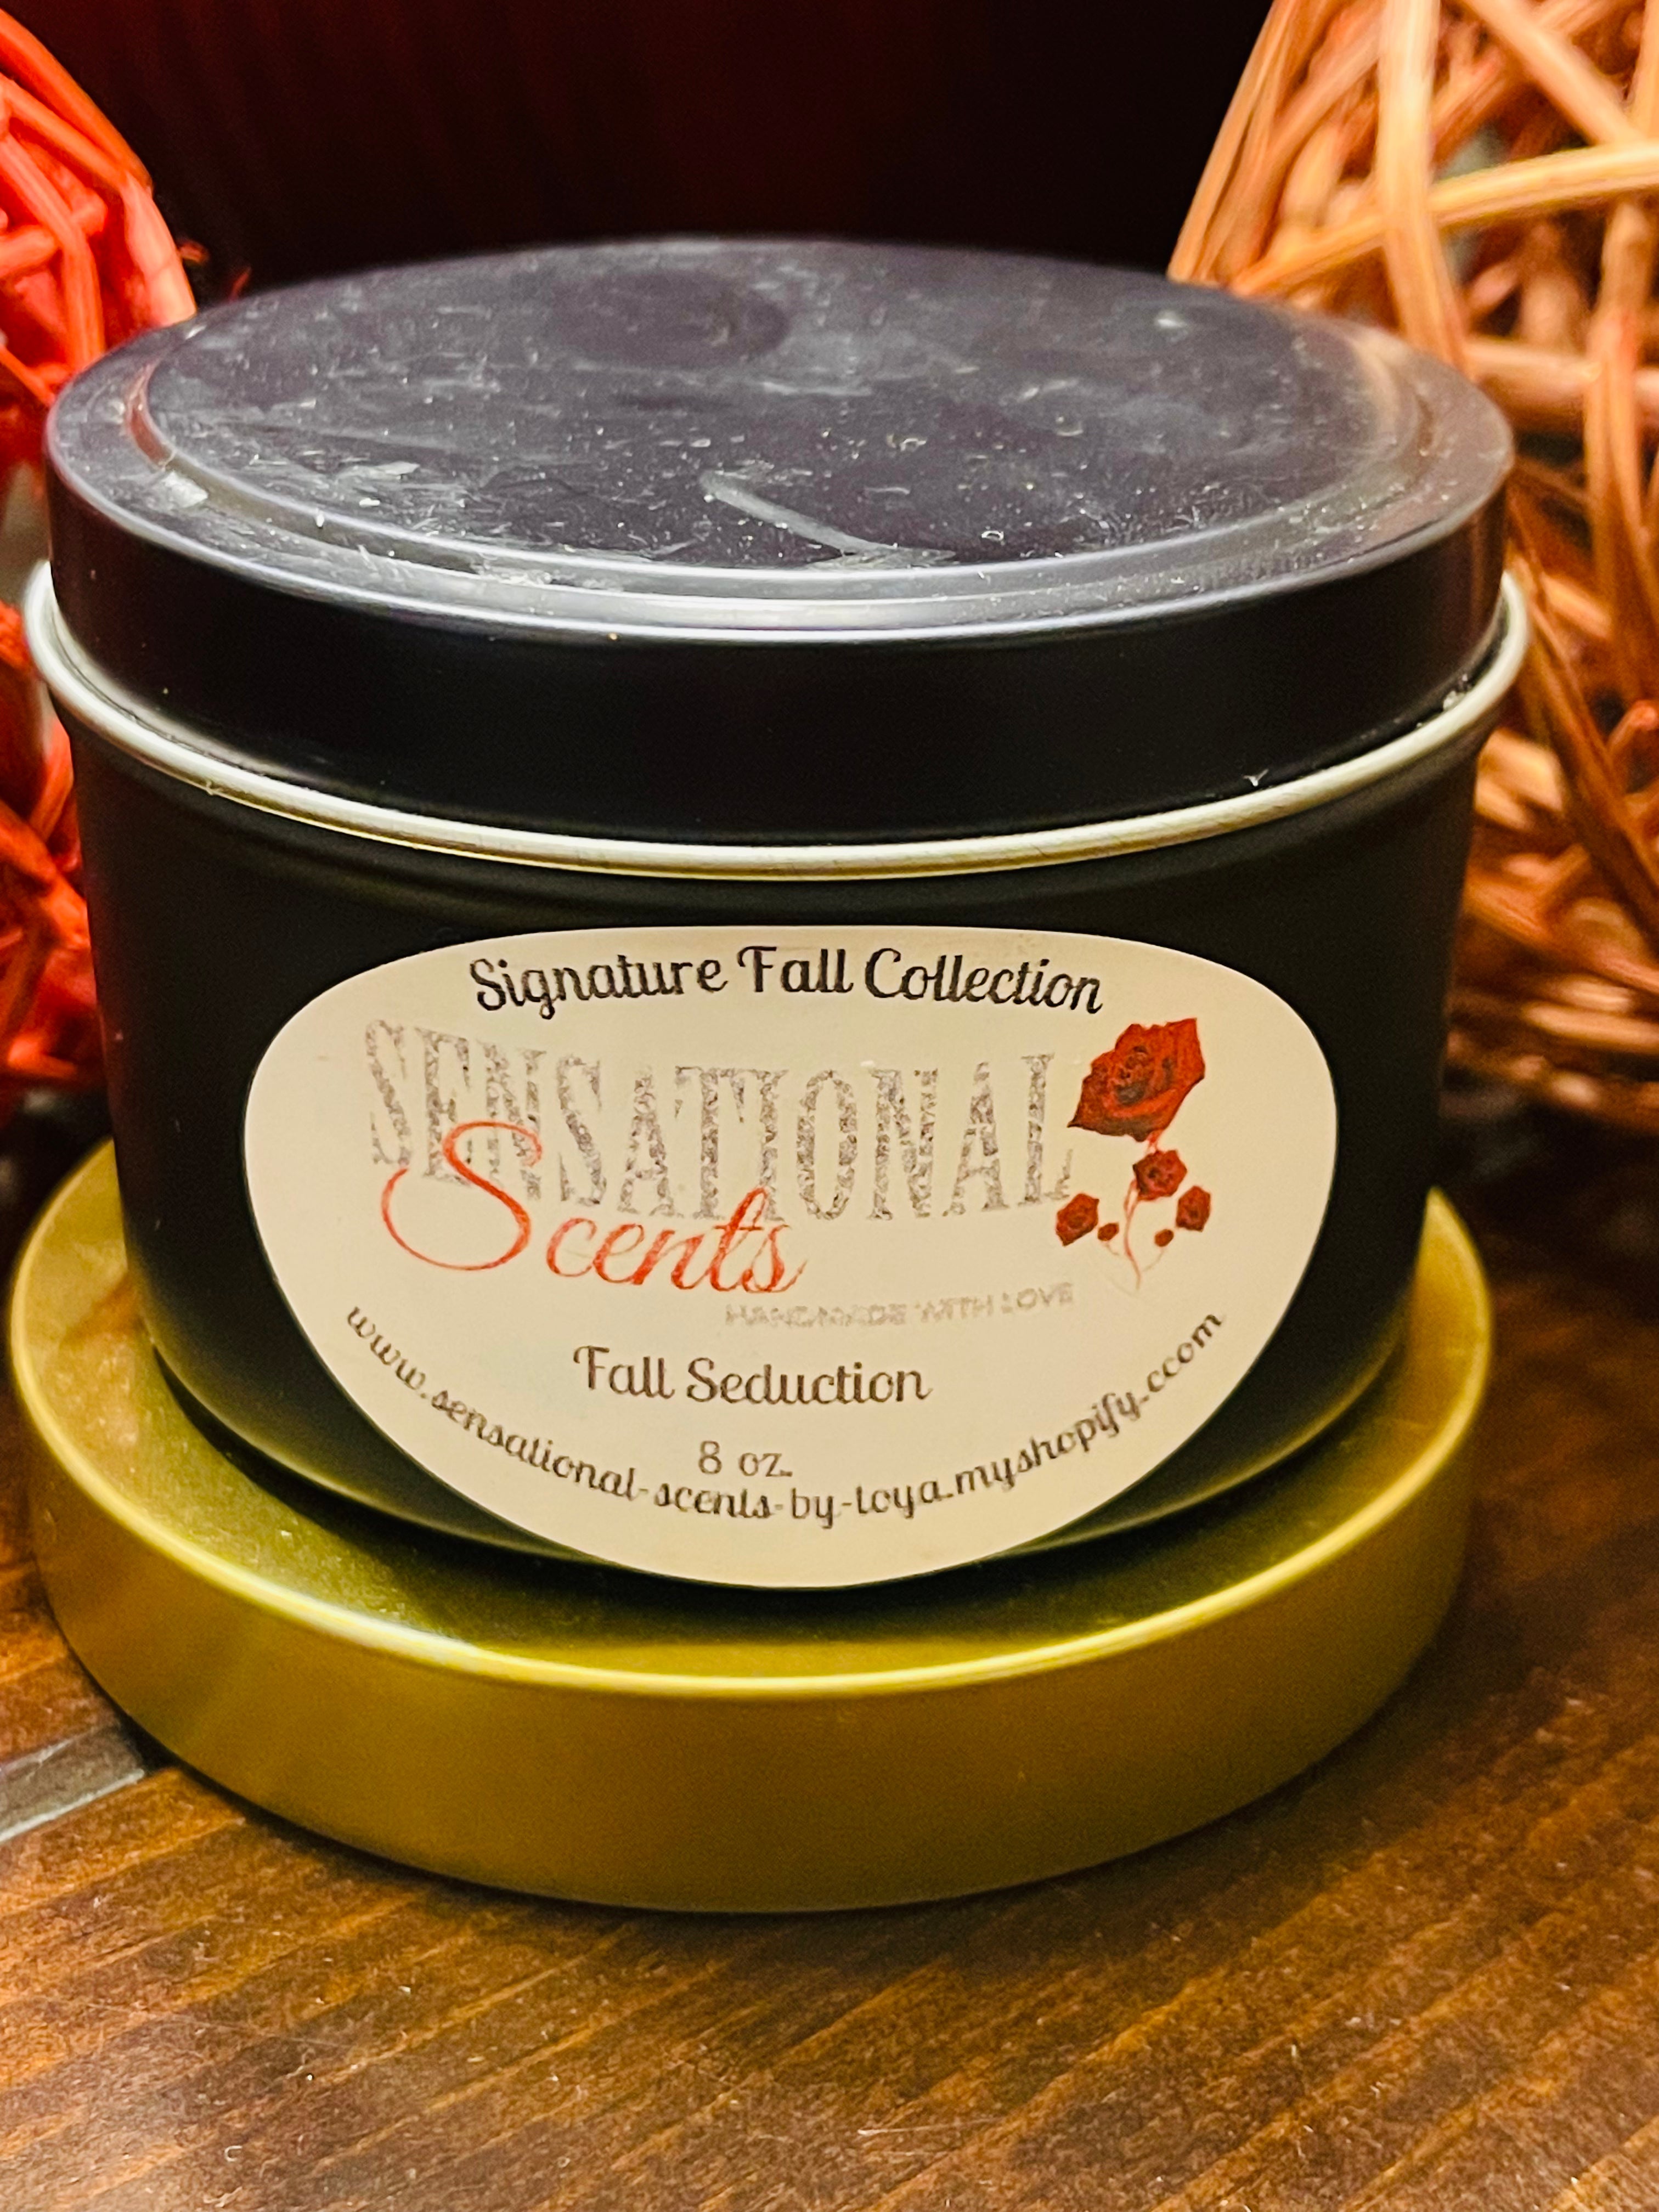 Fall Seduction Scented Candle